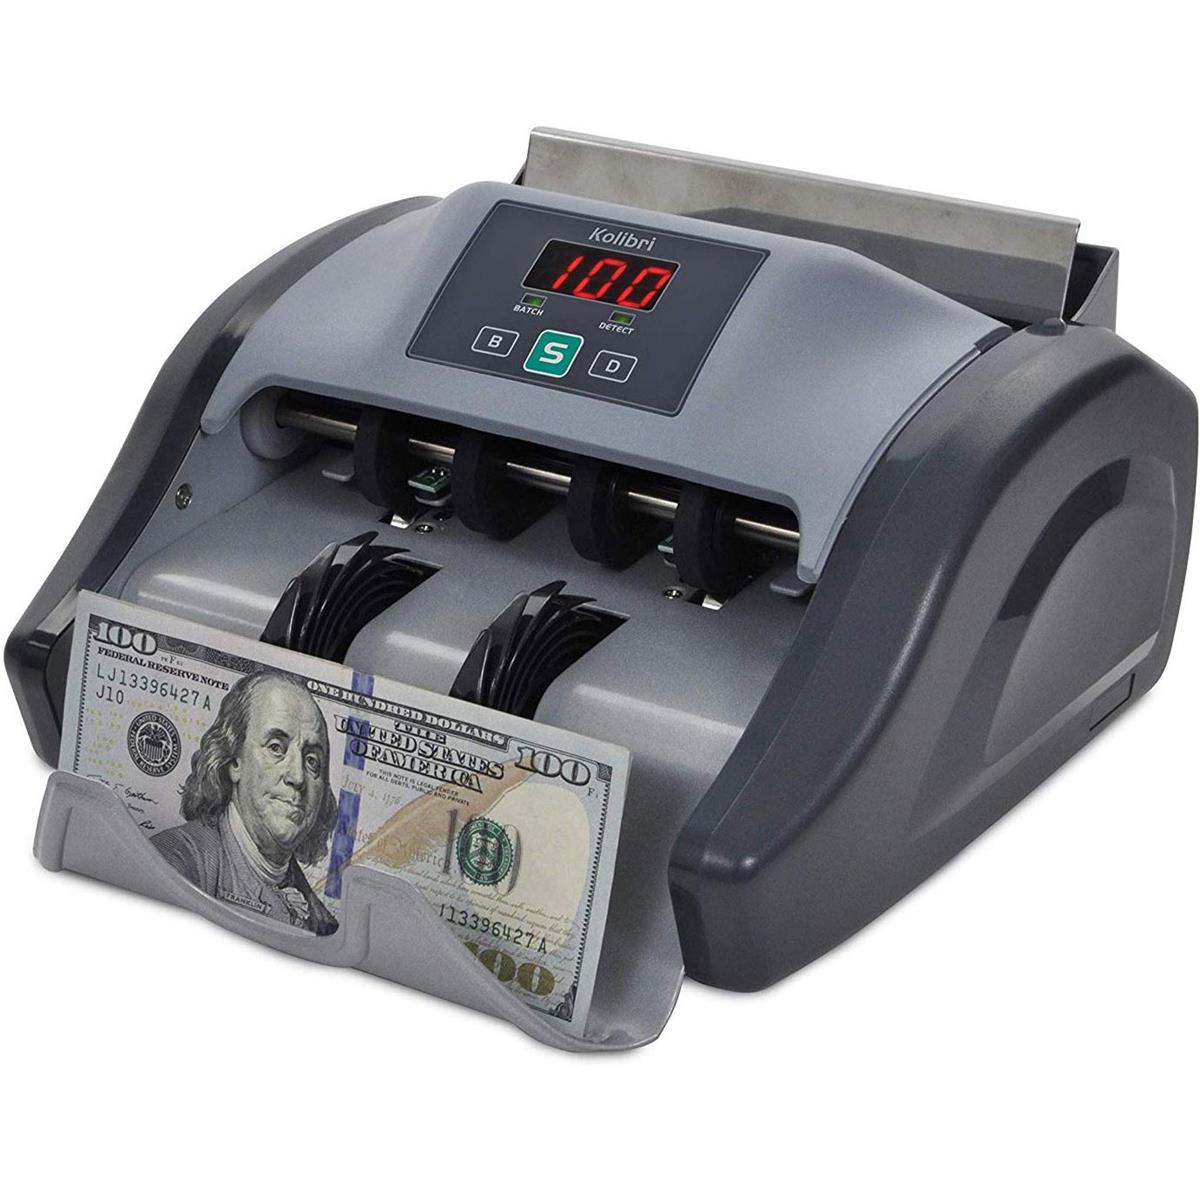 Image of Kolibri Automatic Bill Counter with UV Detection